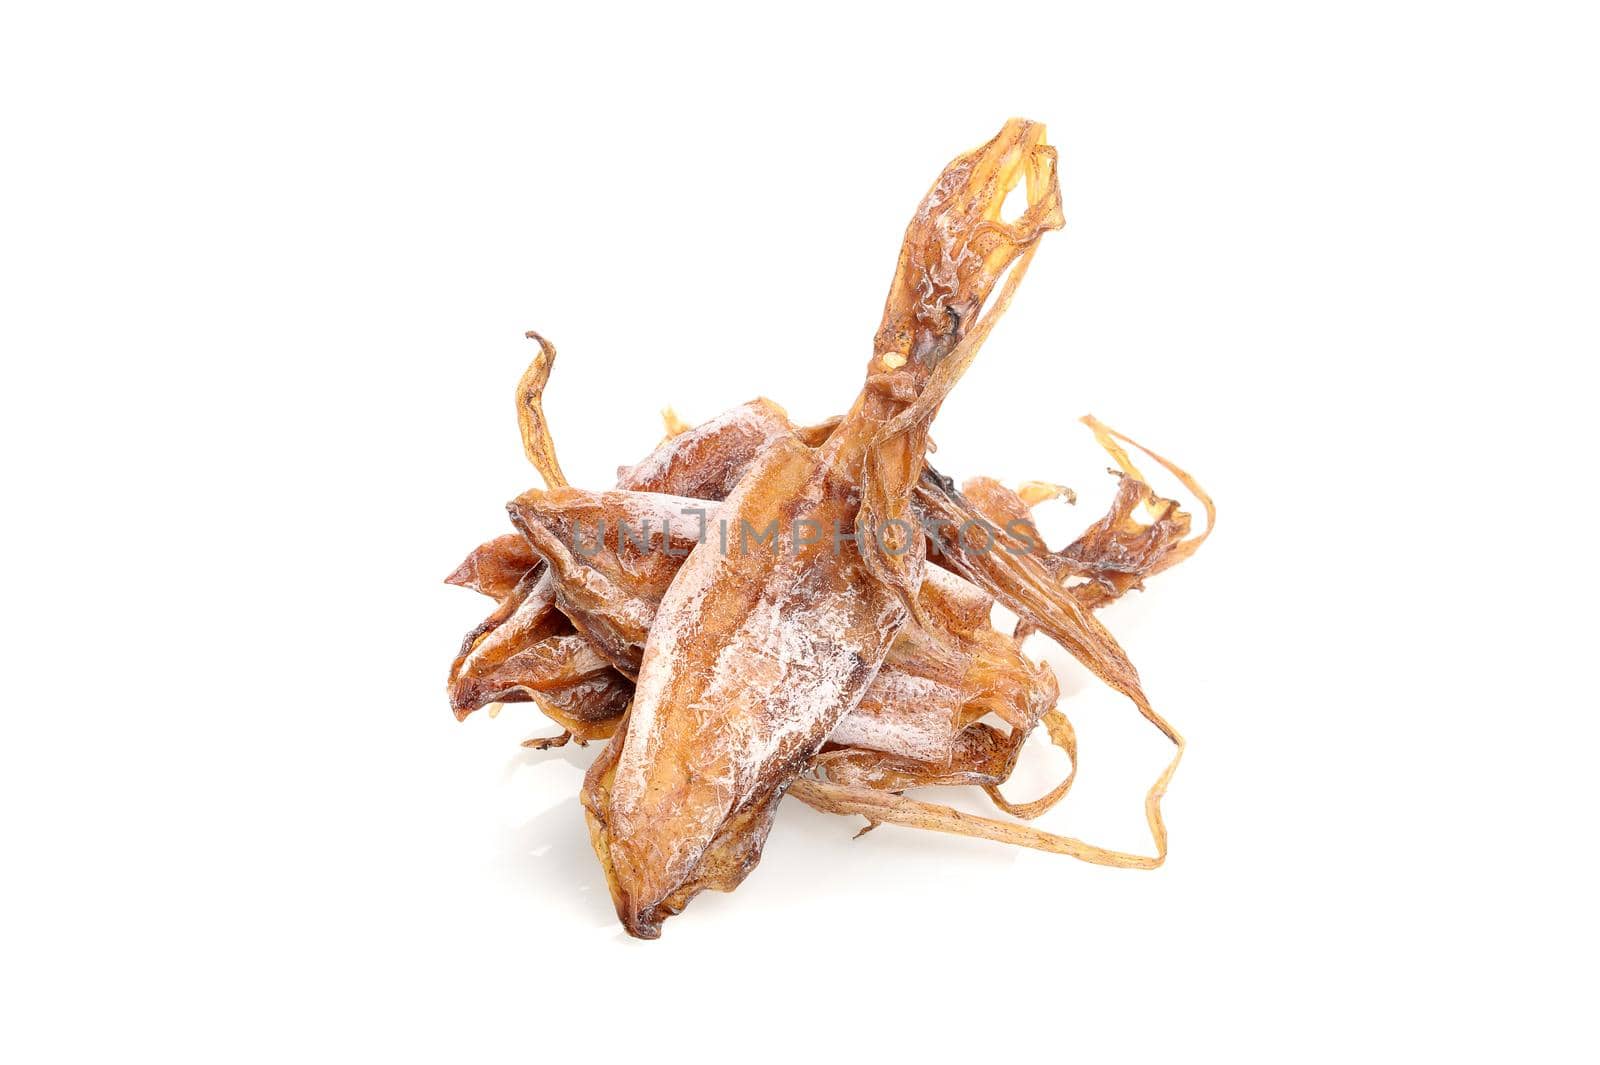 isolate dry squids on white background